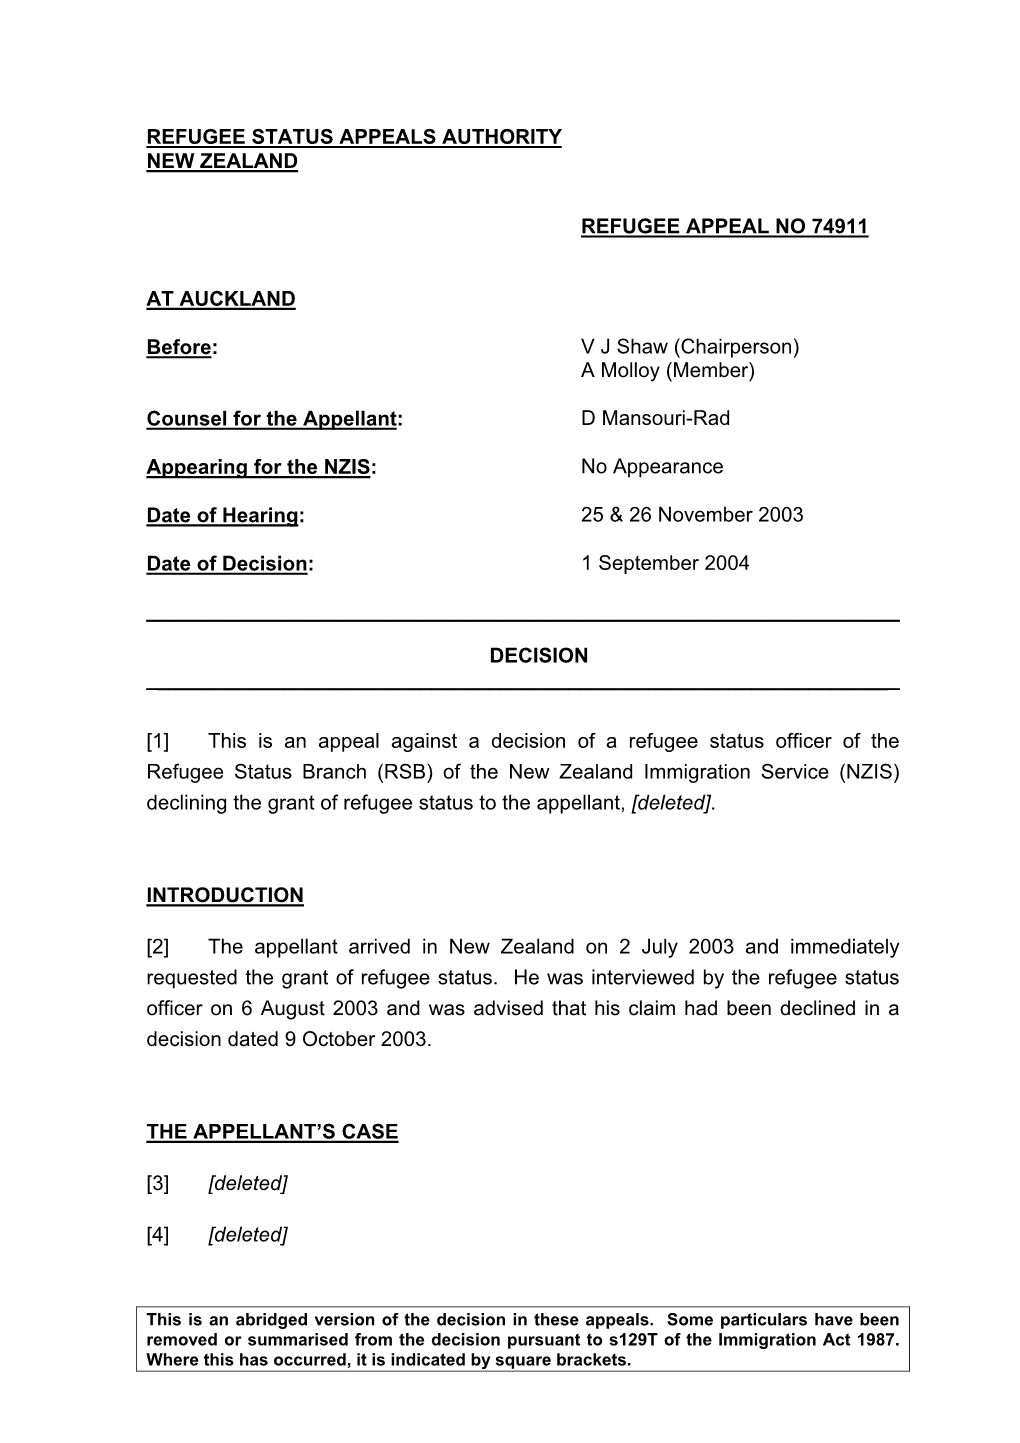 REFUGEE STATUS APPEALS AUTHORITY NEW ZEALAND REFUGEE APPEAL NO 74911 at AUCKLAND Before: V J Shaw (Chairperson) a Molloy (Membe